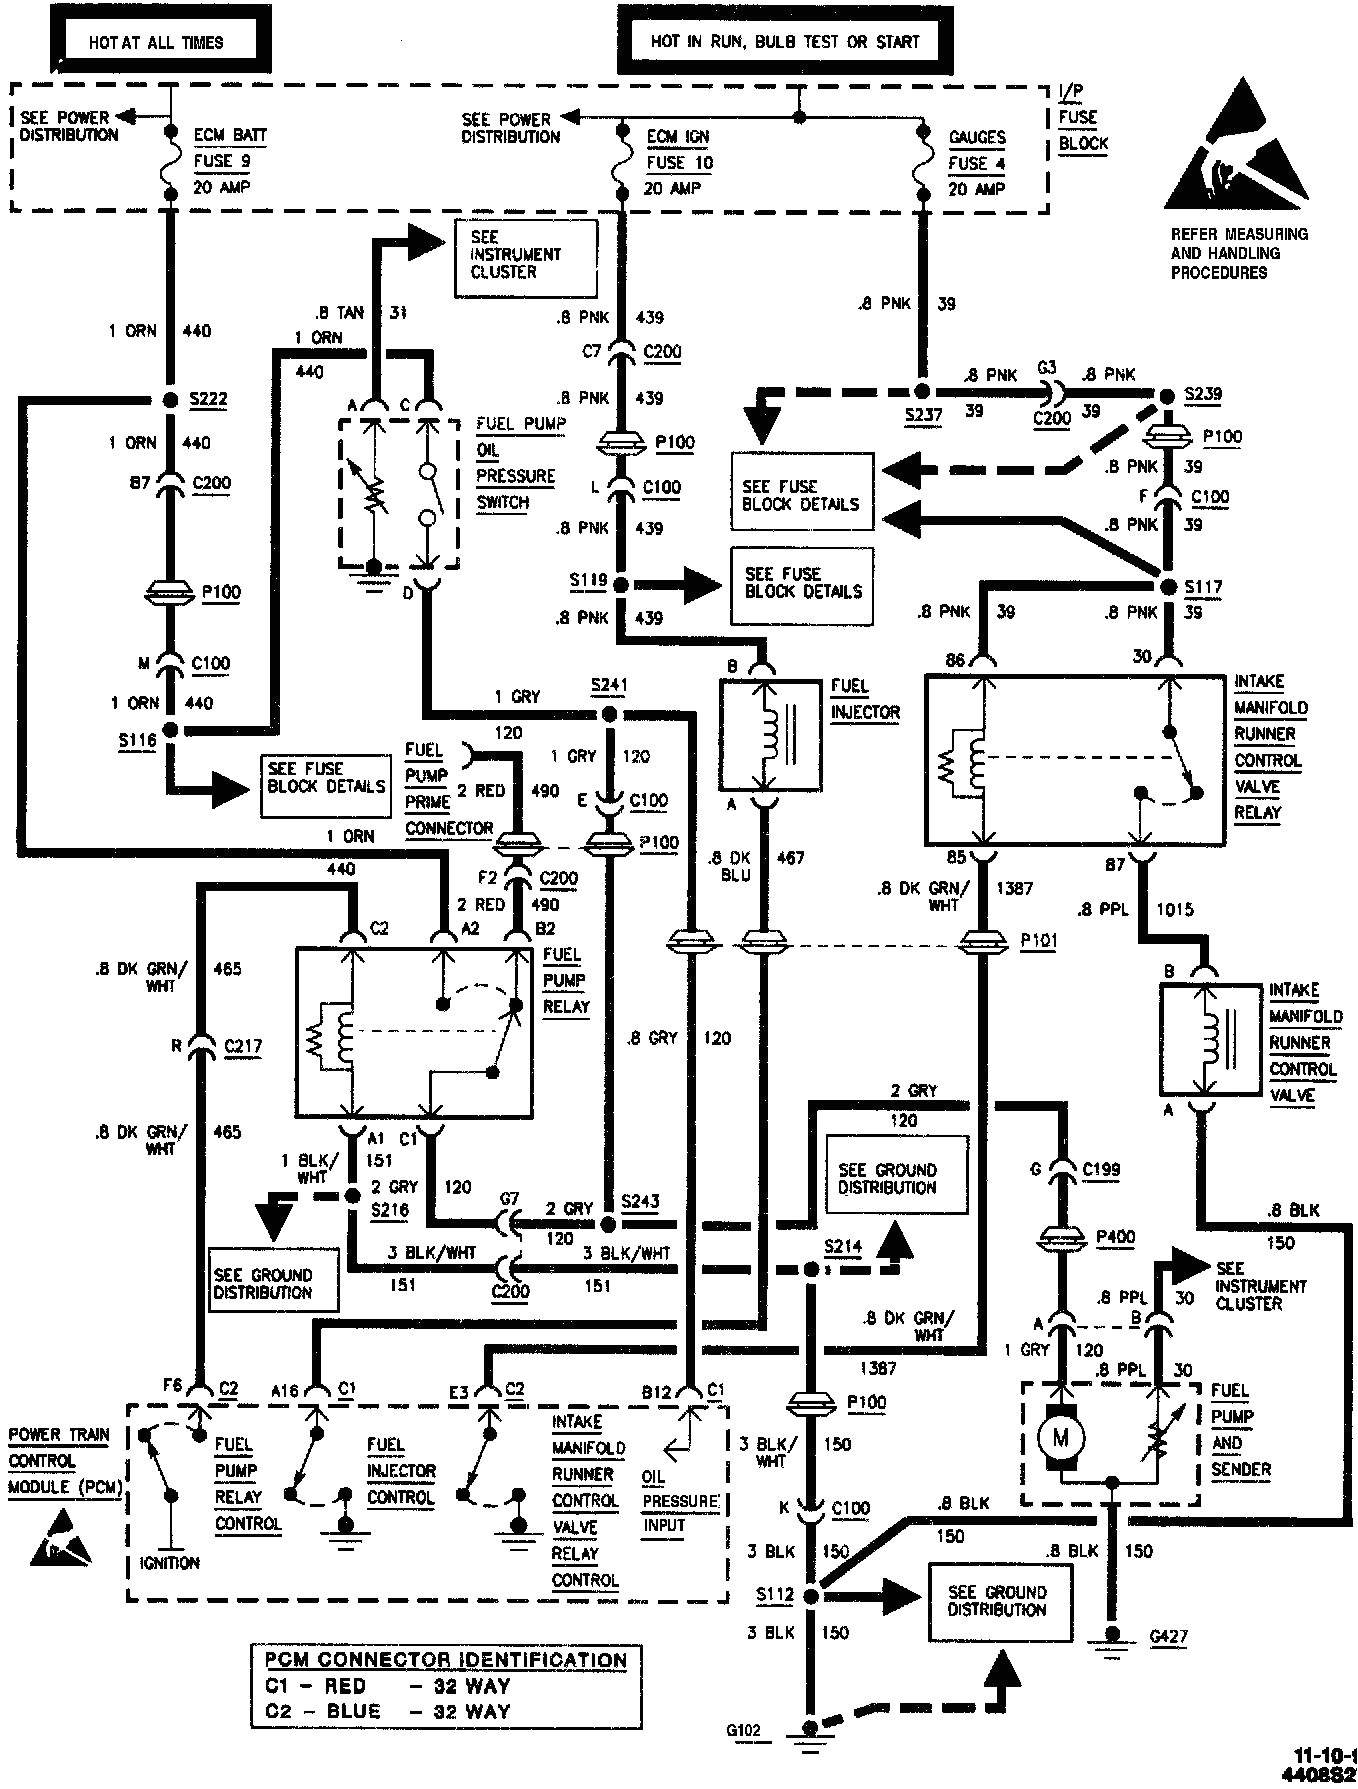 wiring harness for 1987 chevy s 10 pickup wiring diagrams show wiring diagram for 2002 s10